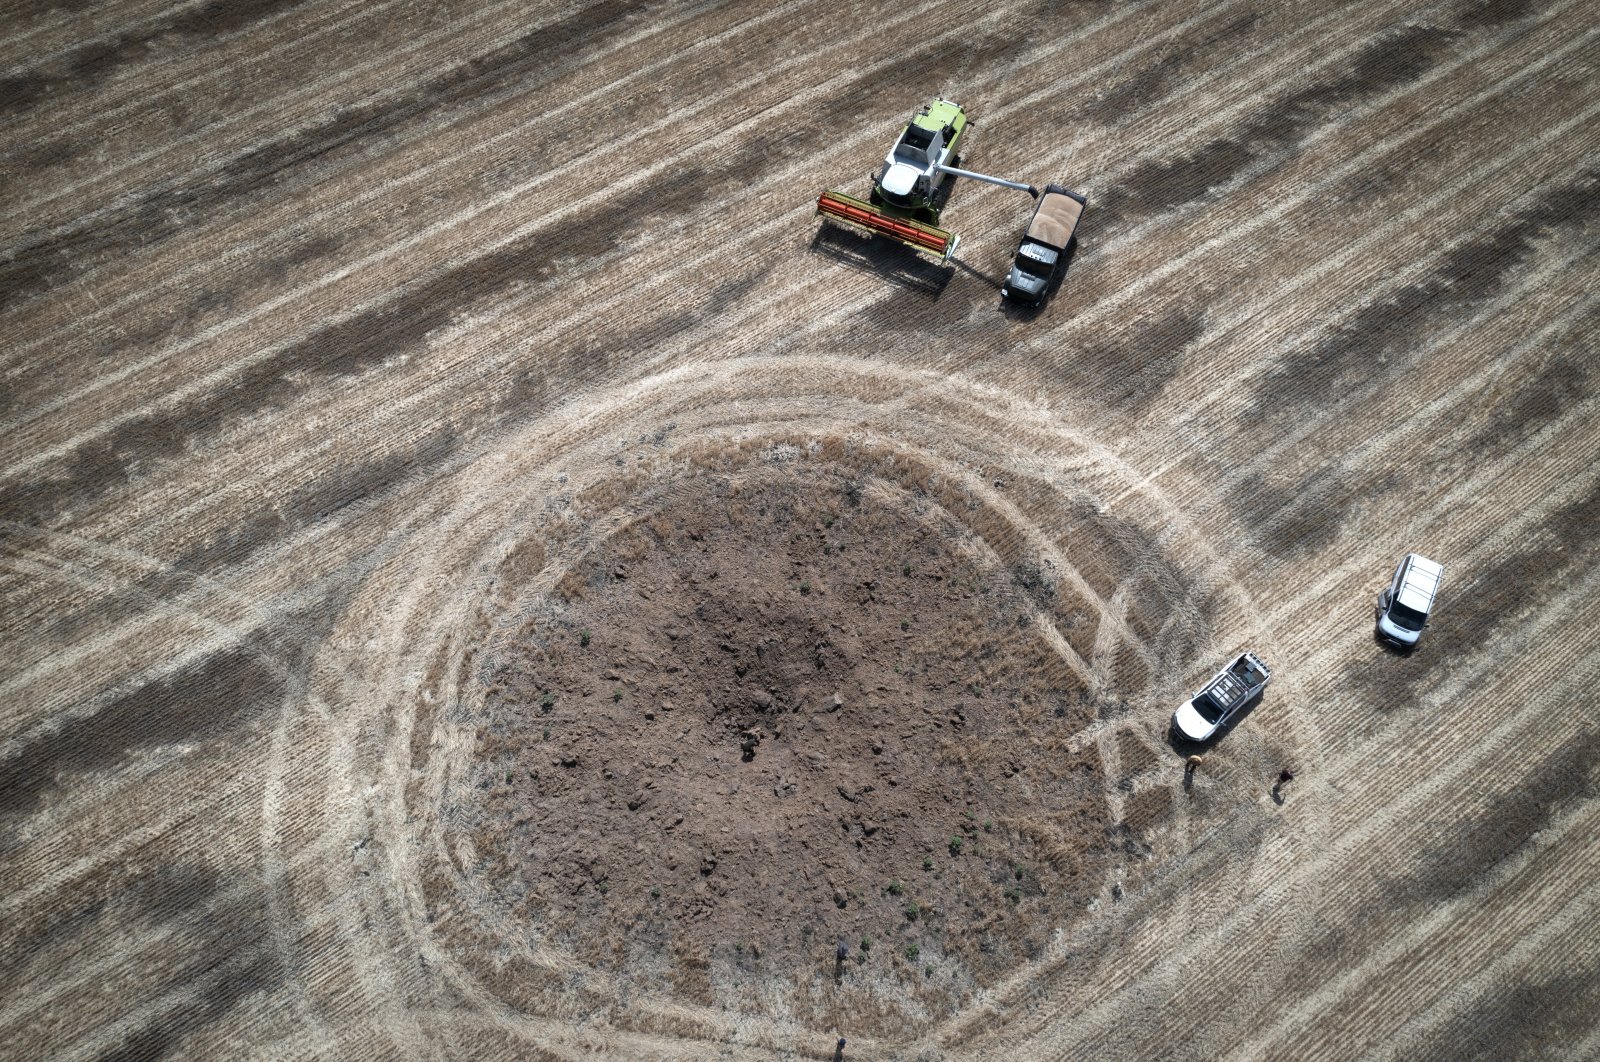 A farmer collects a harvest on a field beside a crater left by a Russian rocket, in the Dnipropetrovsk region, Ukraine, July 4, 2022. (AP Photo)